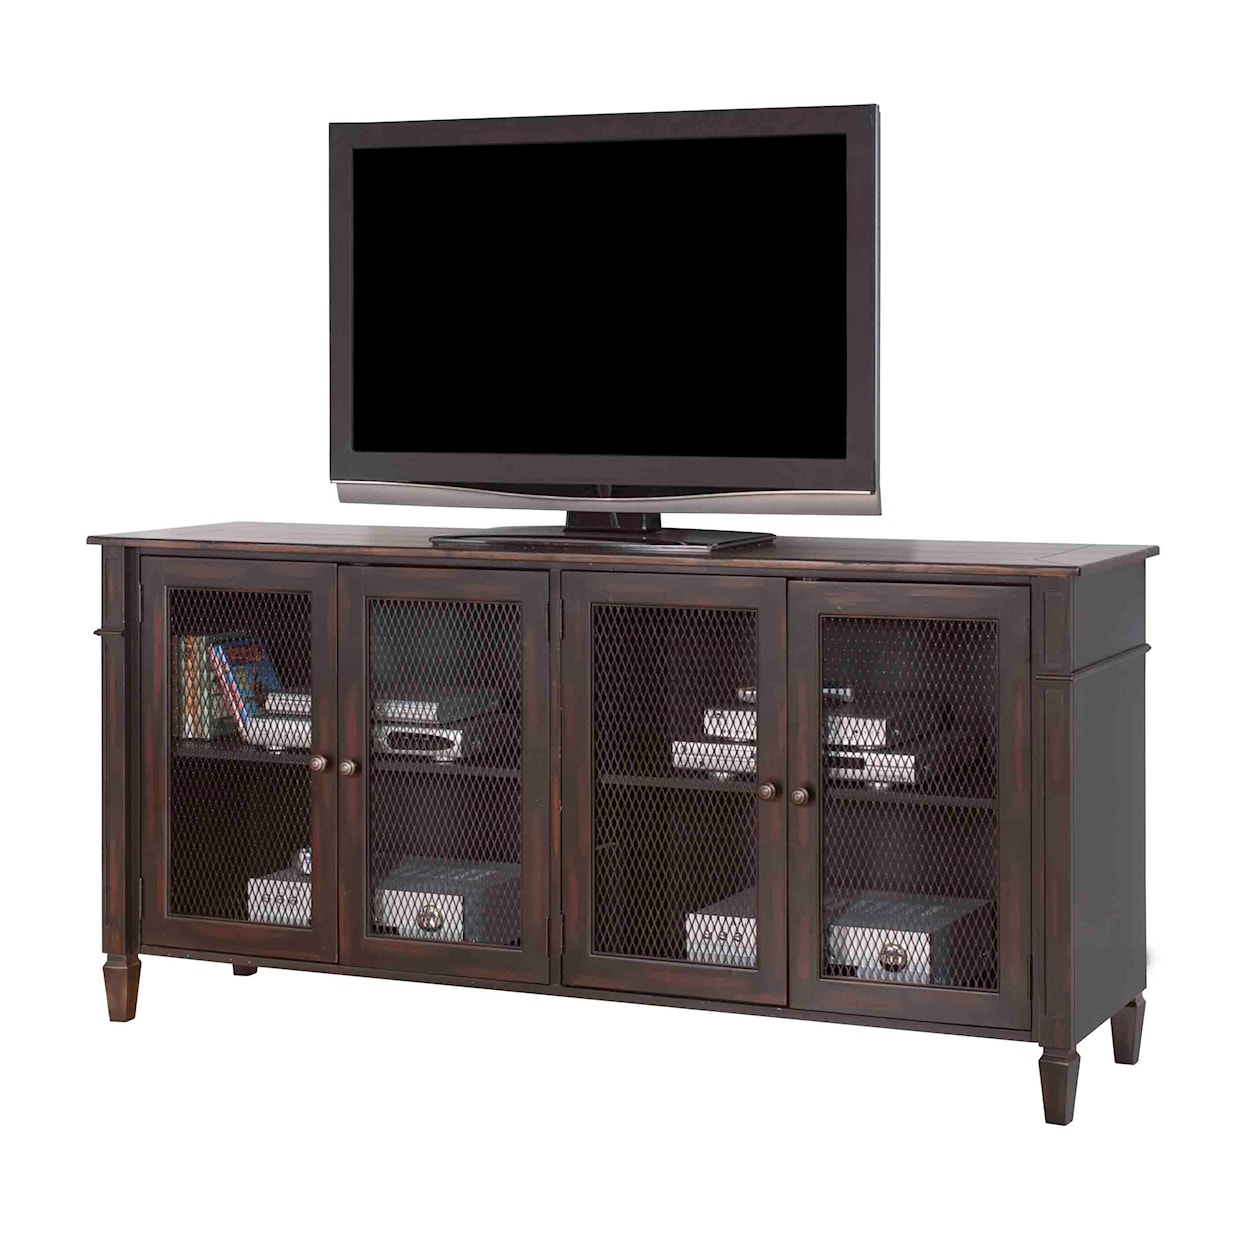 Martin Home Furnishings Eclectic Home Entertainment & Storage 72" TV Console